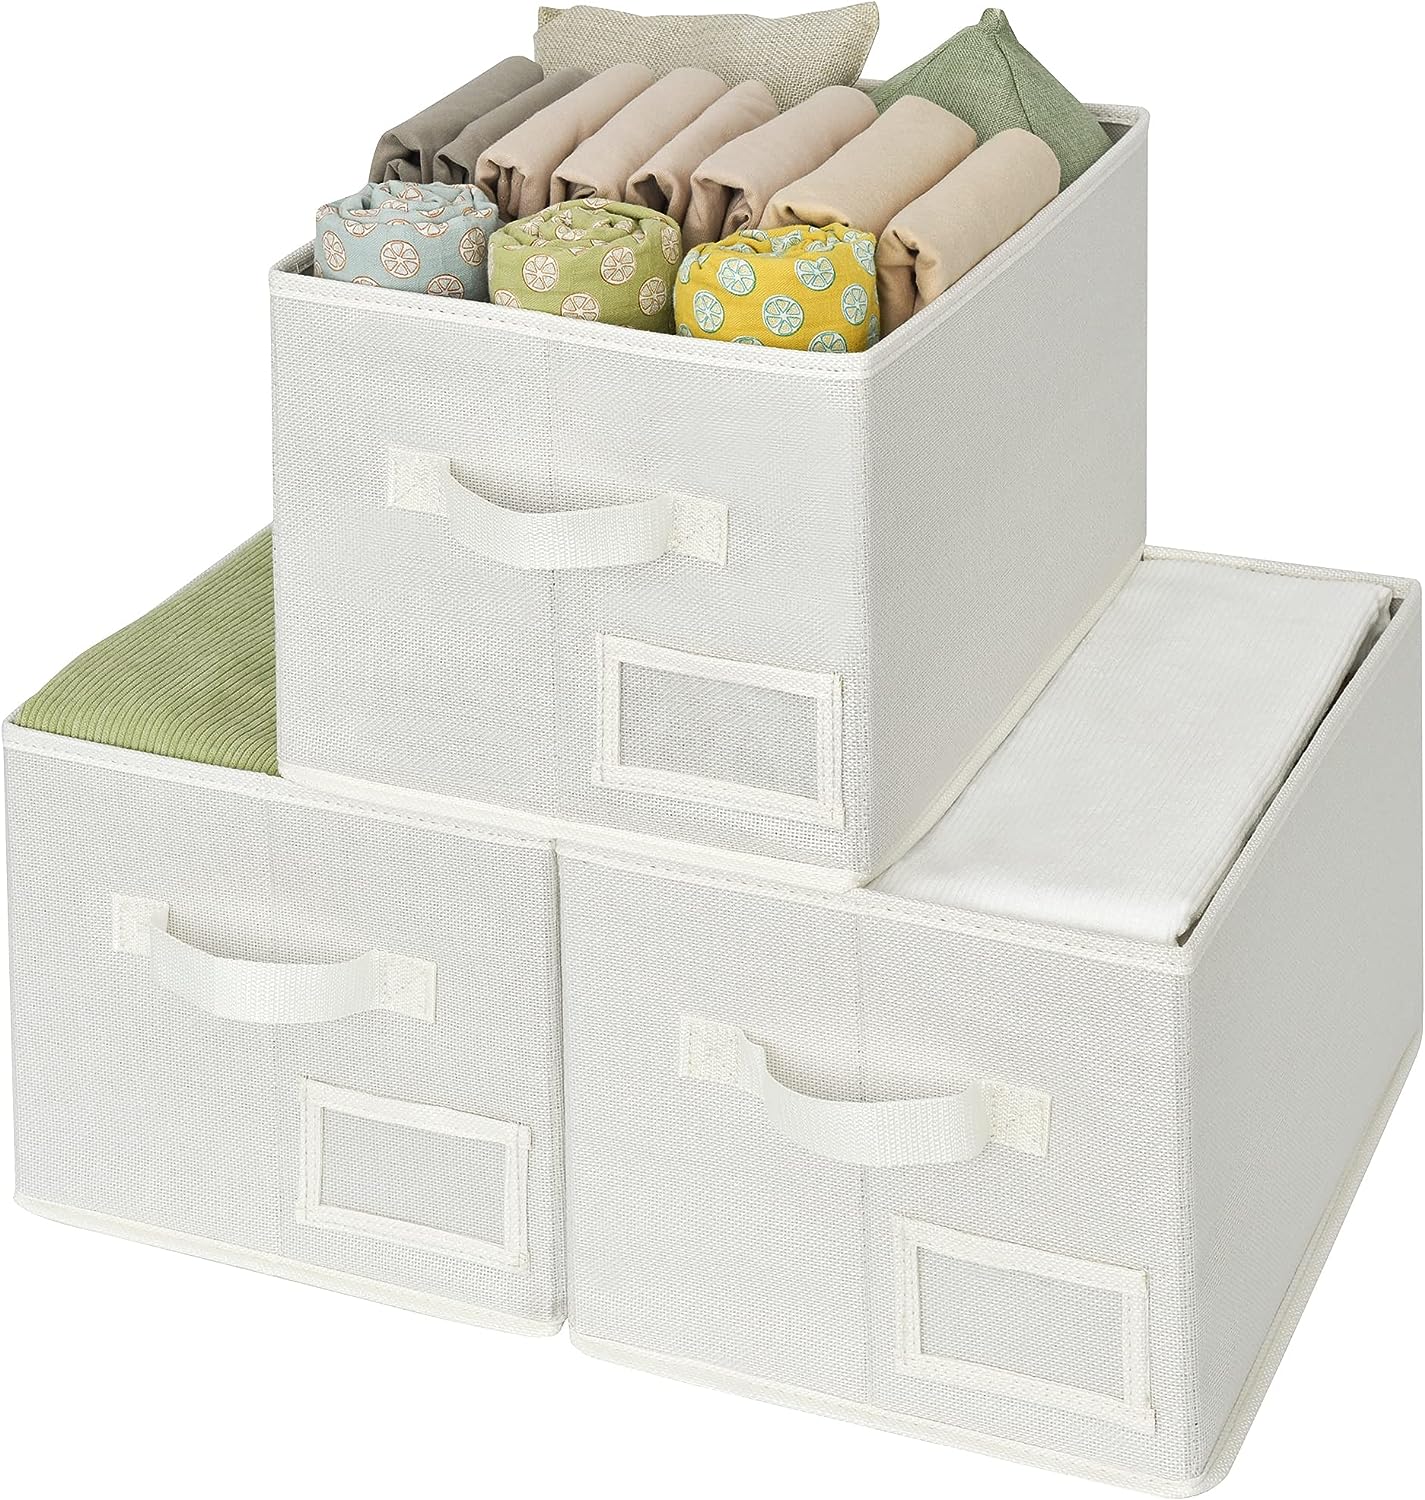 Clothing Storage Bins for Closet with Handles Foldable Rectangle